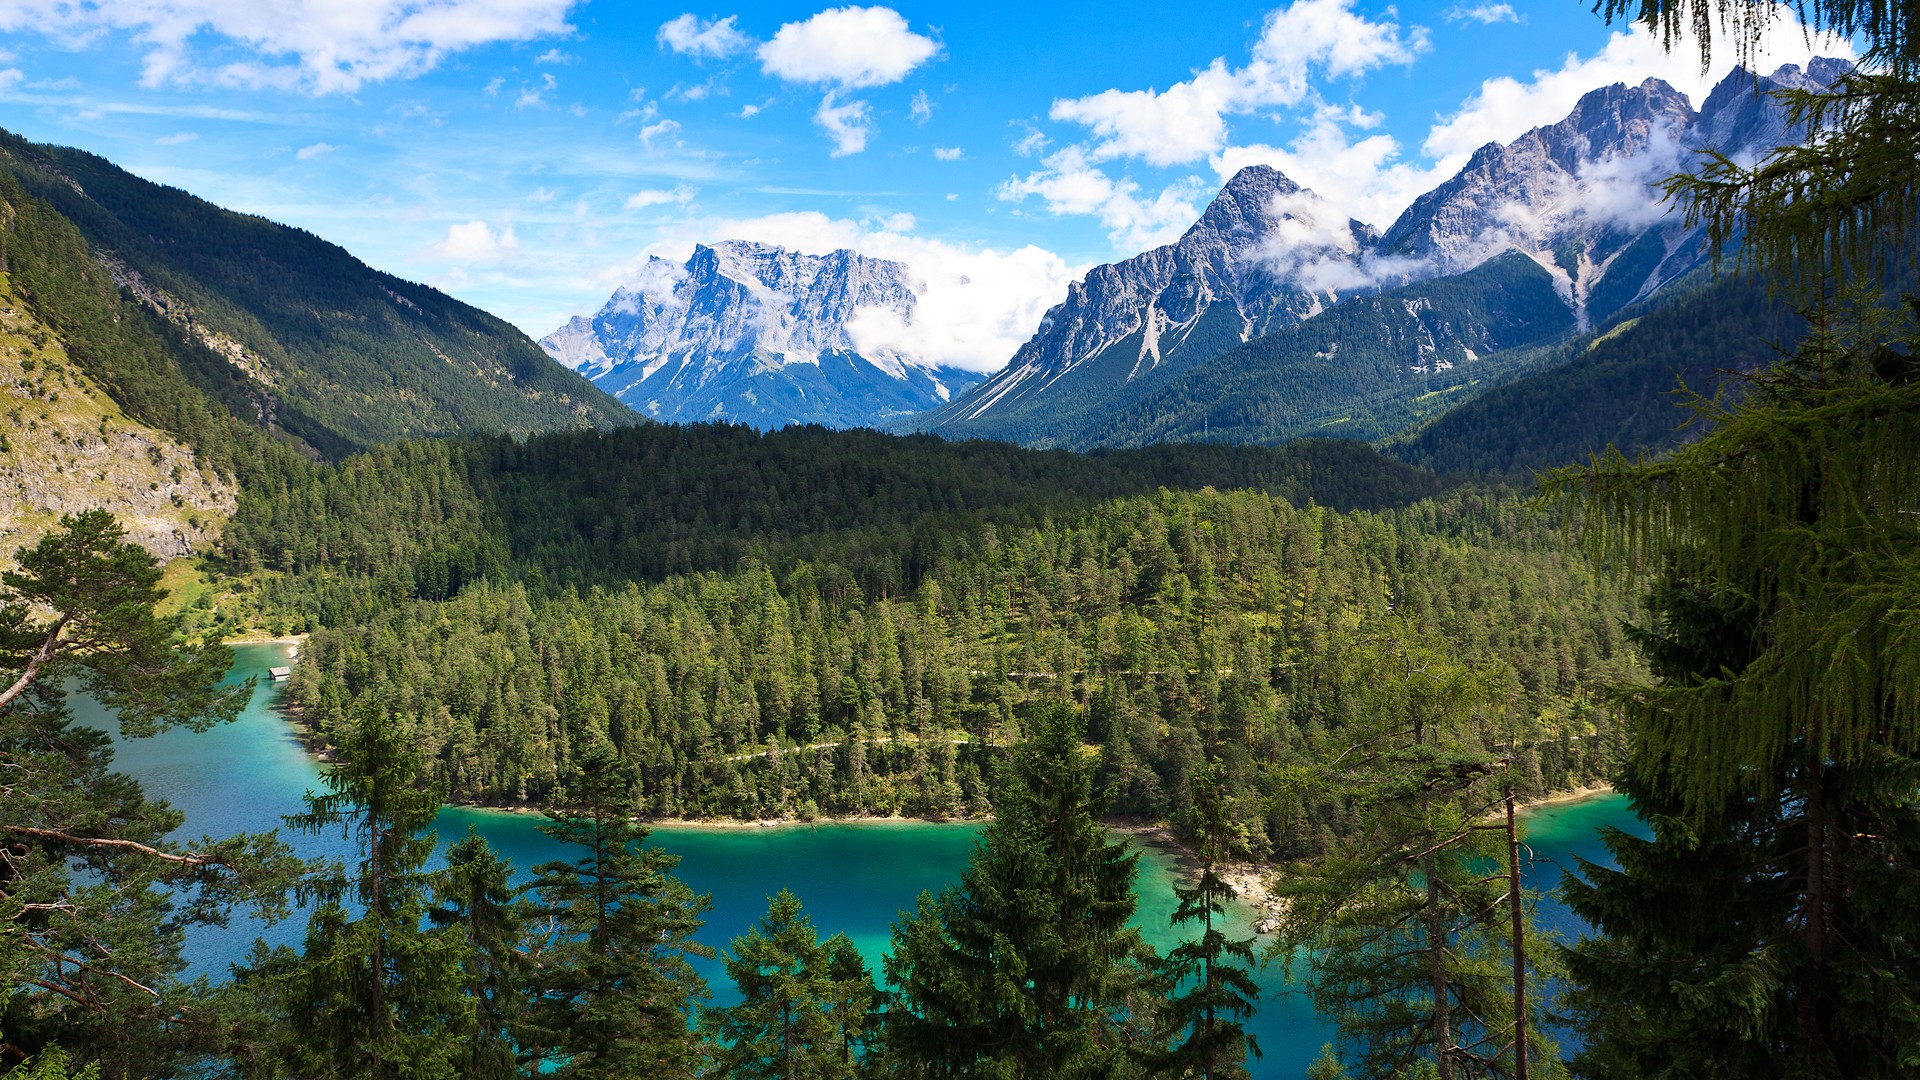 General 1920x1080 landscape nature forest mountains pine trees Canada